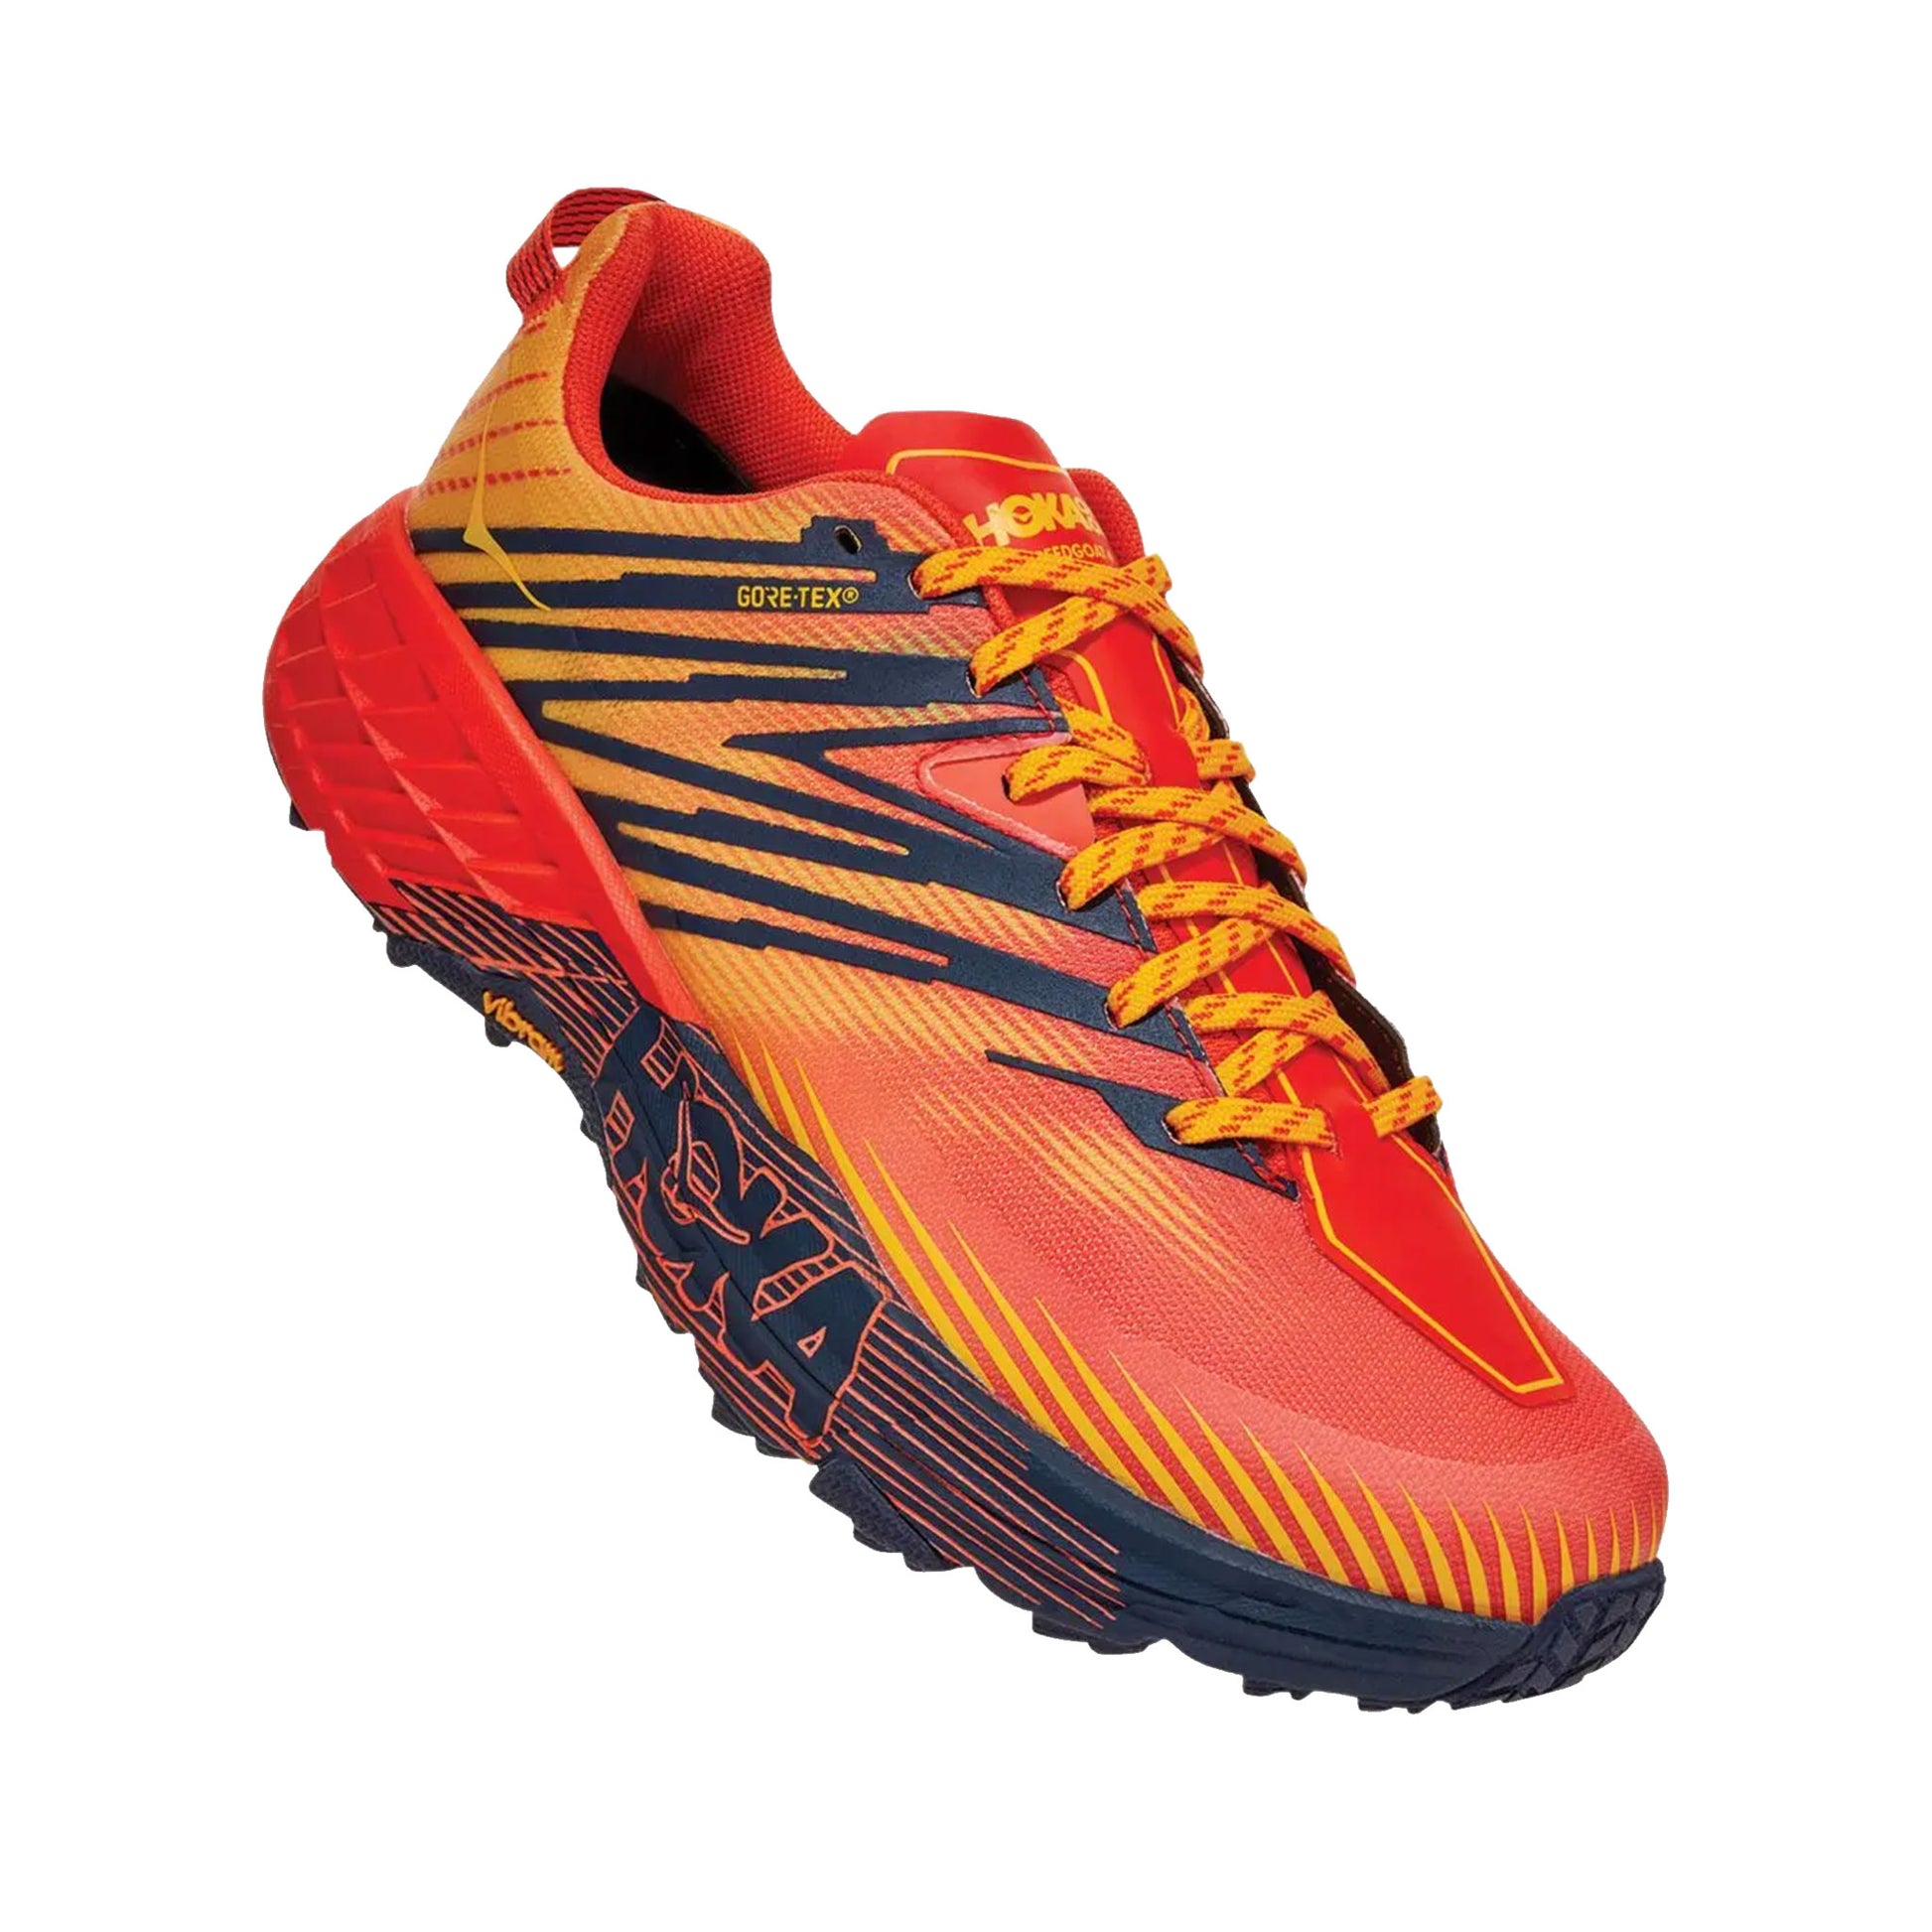 hoka one one shoes online Speedgoat 4 Gore-Tex Mandarin Red Gold Fusion sneakers runners footwear